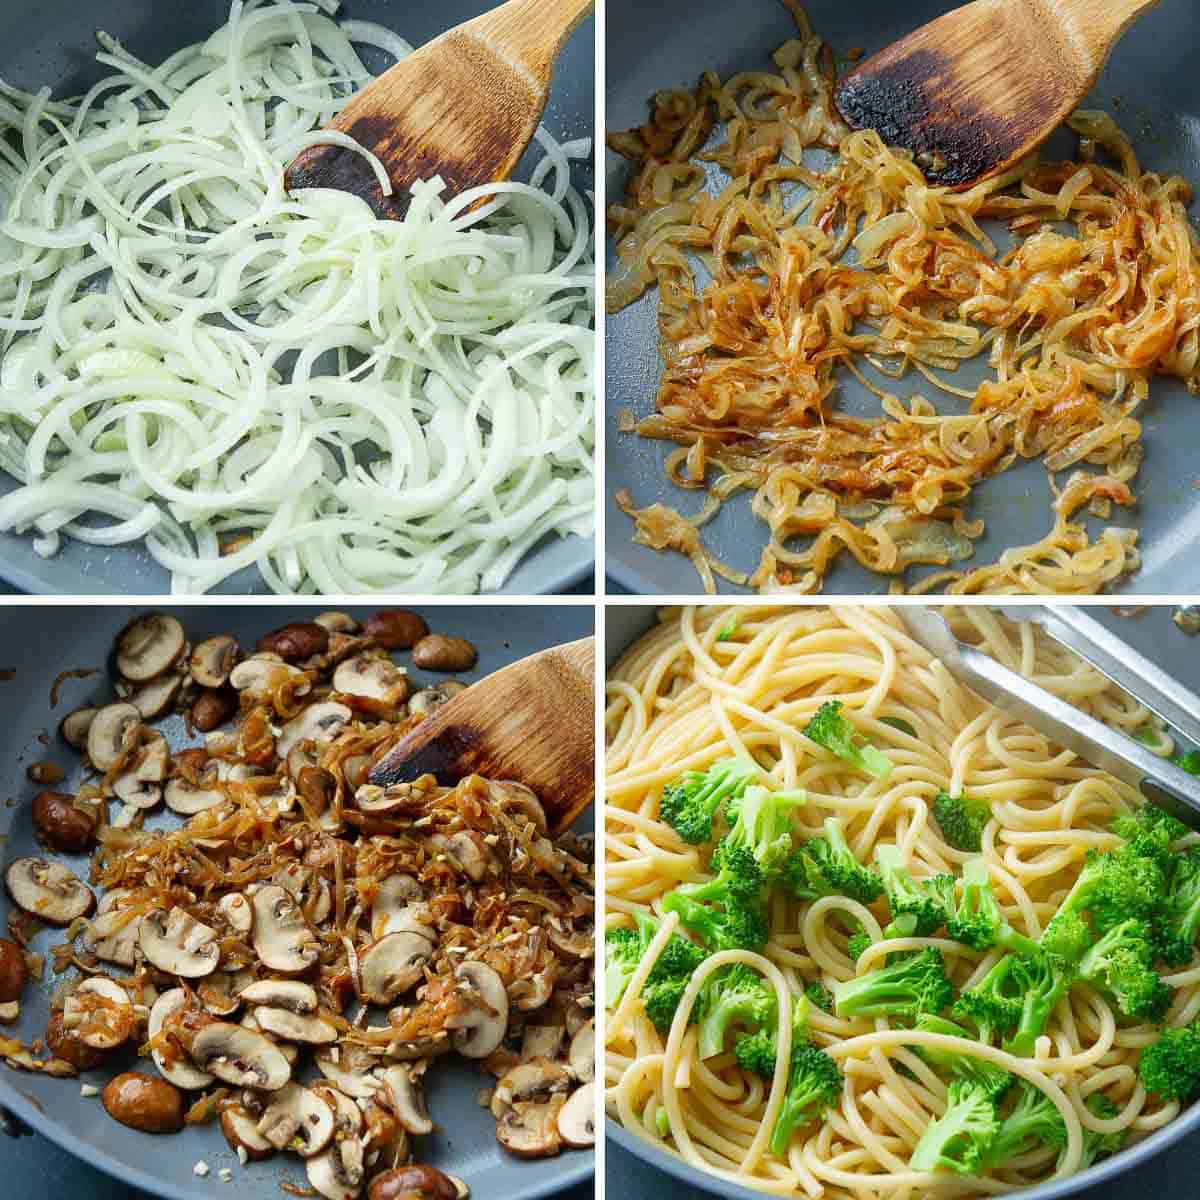 Collage of steps for making mushroom broccoli pasta with caramelized onions.